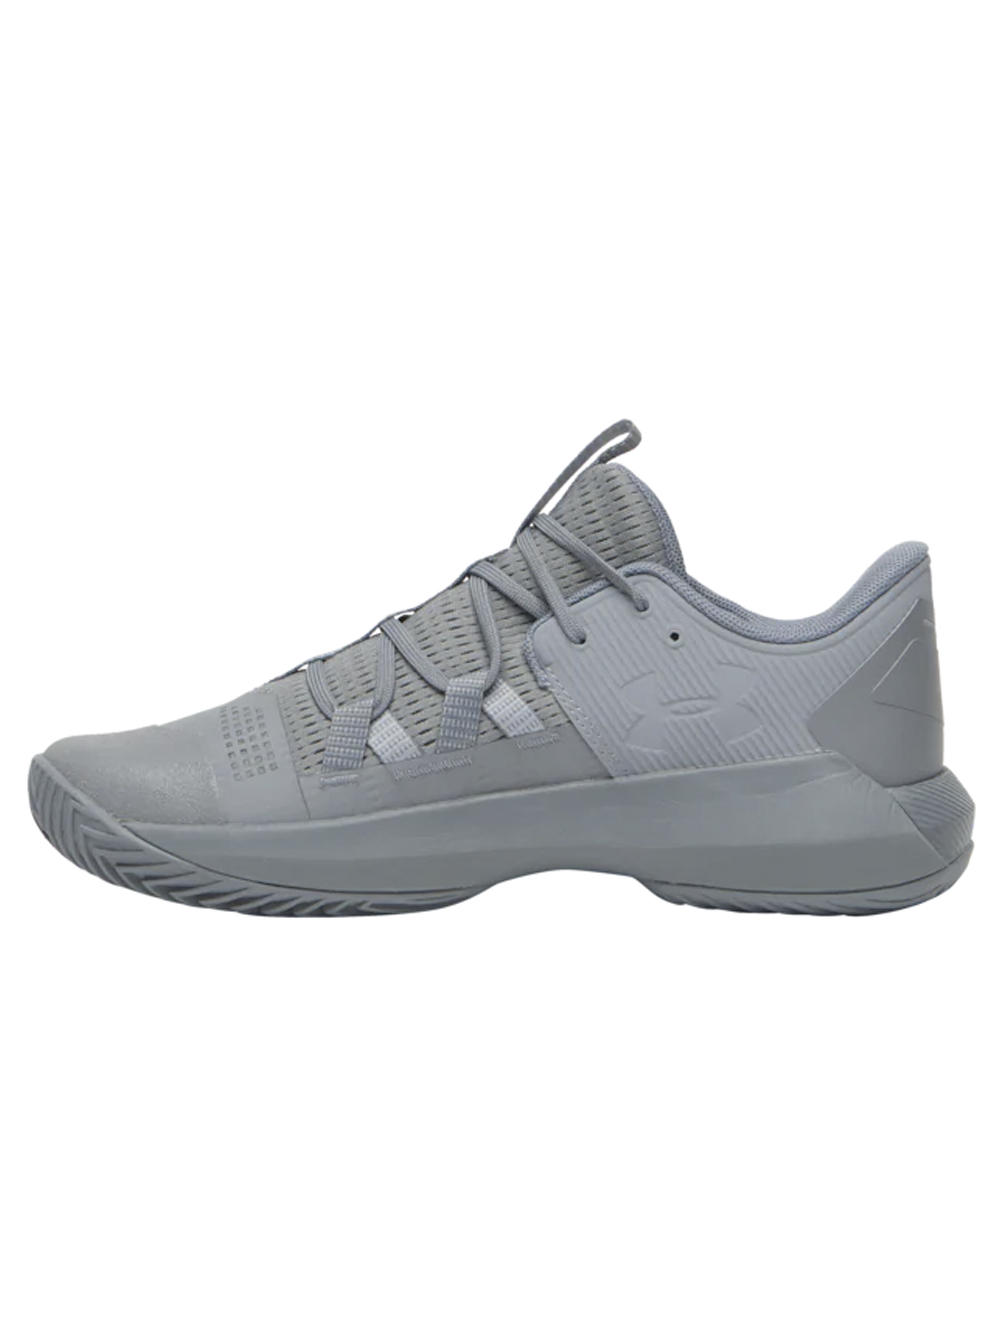 Under Armour Block City 2 Shoes - Grey | Volleyball Warehouse